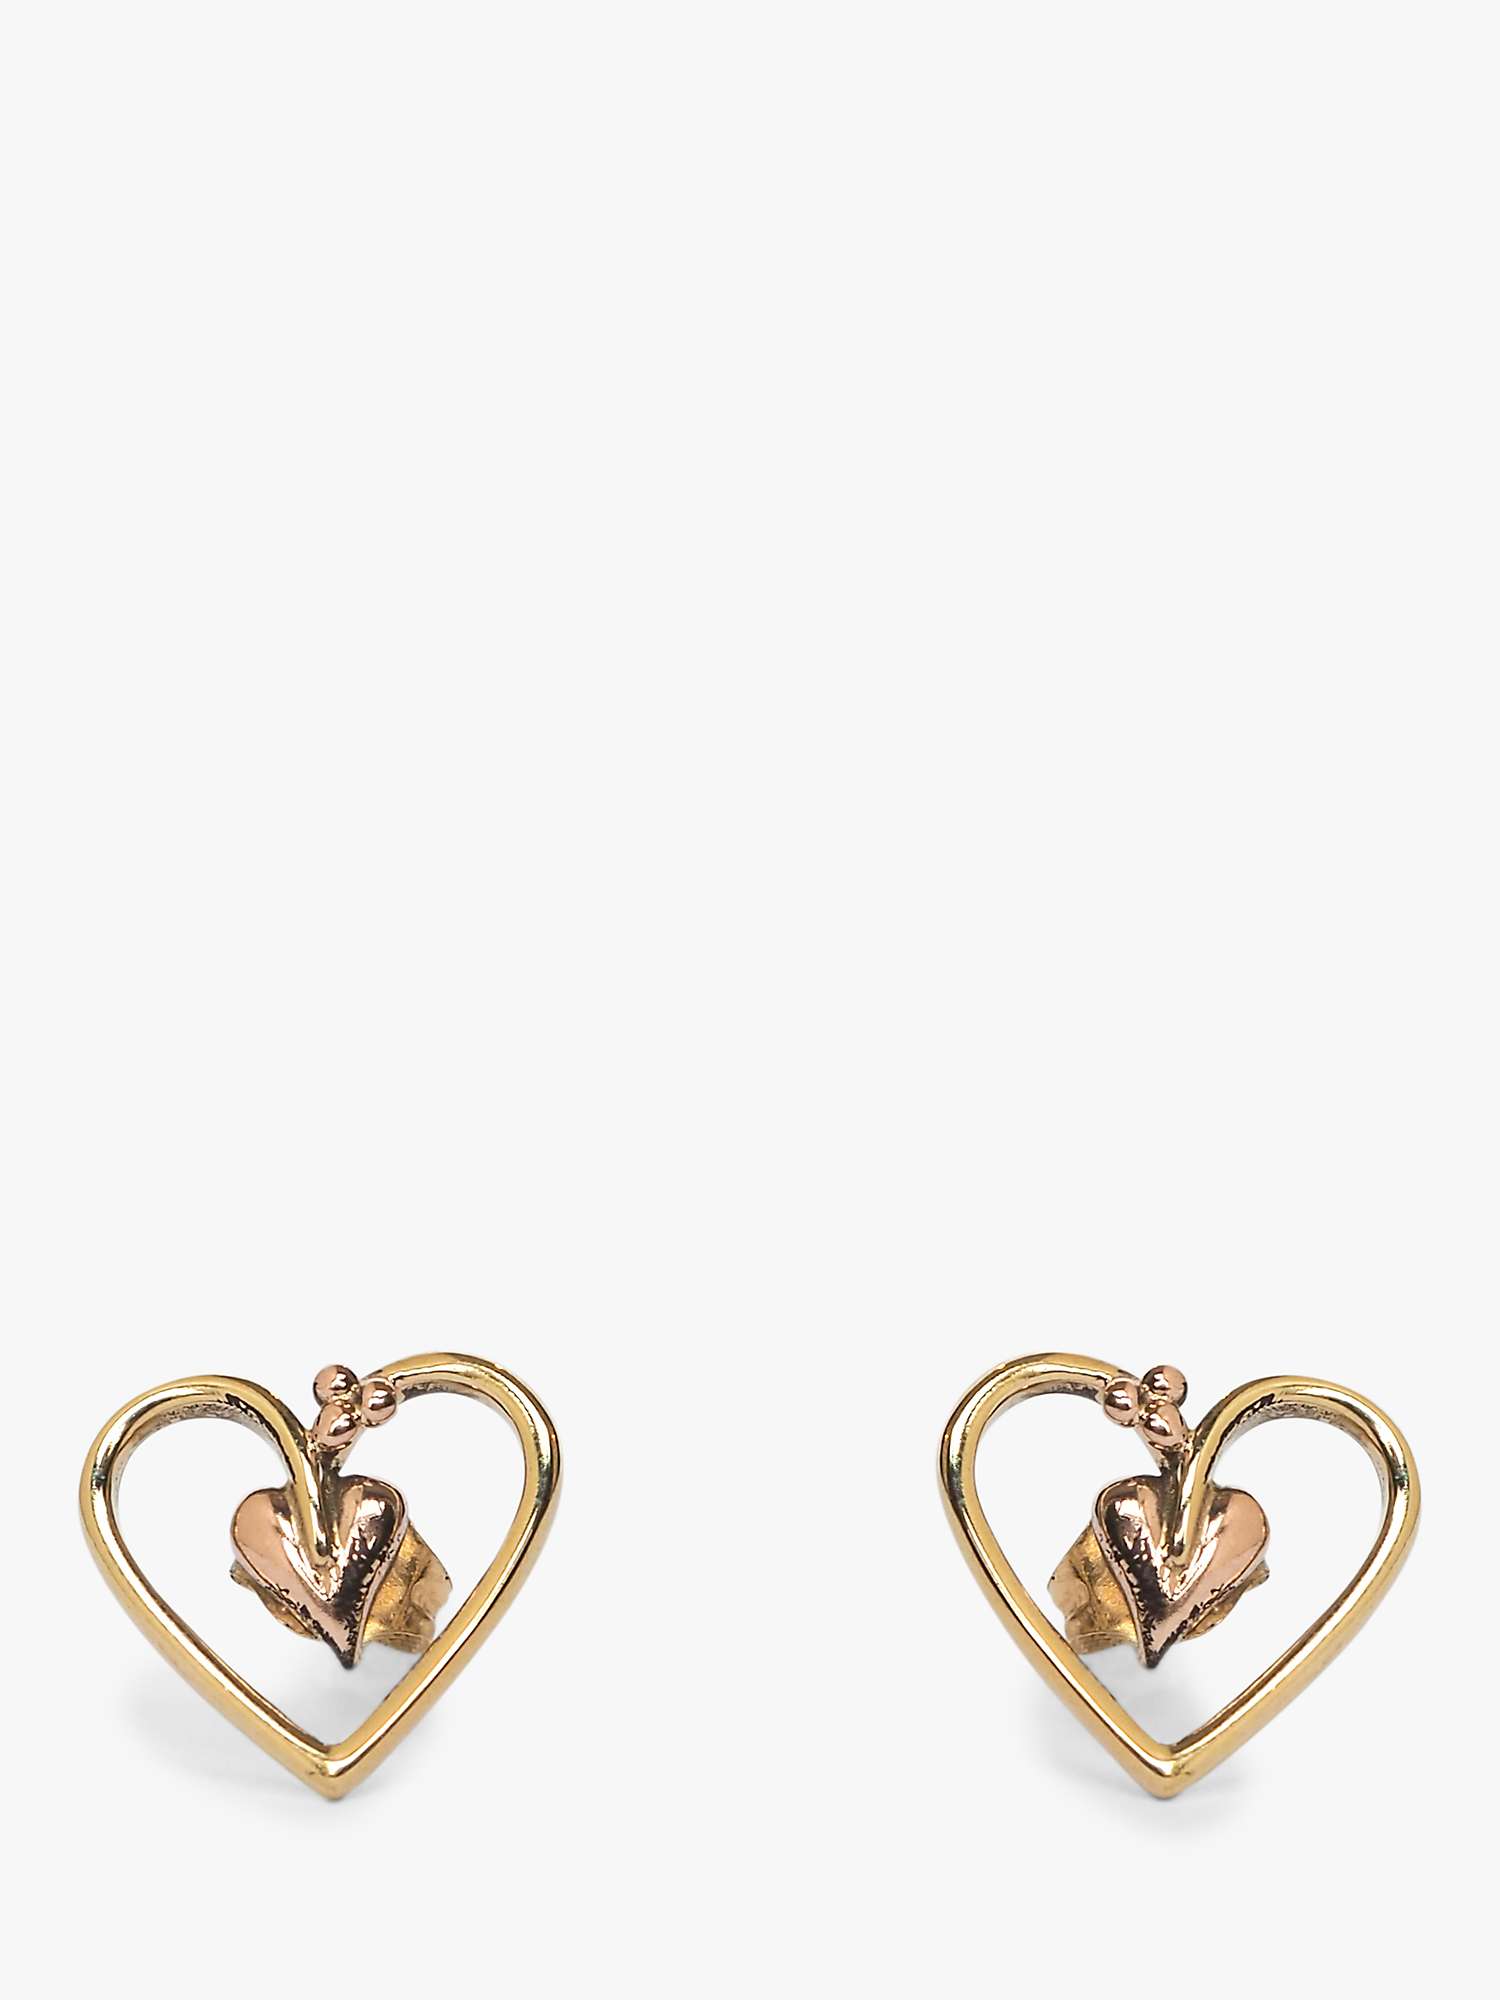 Buy L & T Heirlooms Second Hand 9ct Yellow Gold Heart Stud Earrings, Gold Online at johnlewis.com